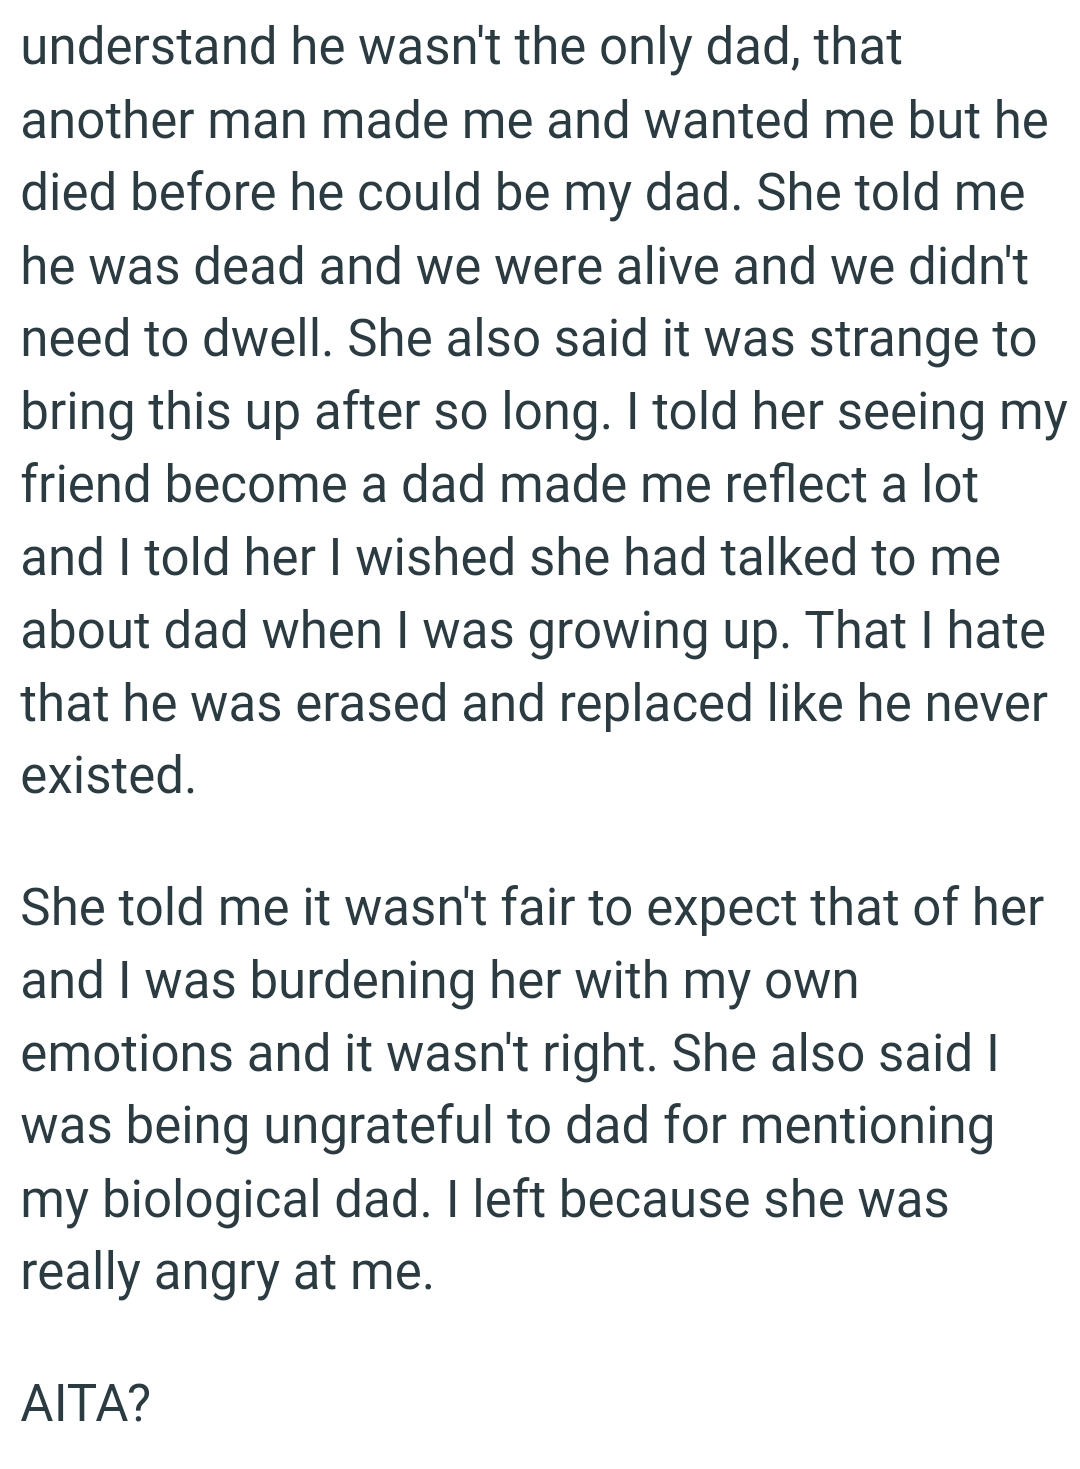 The OP hates how her late dad was erased and replaced like he never existed